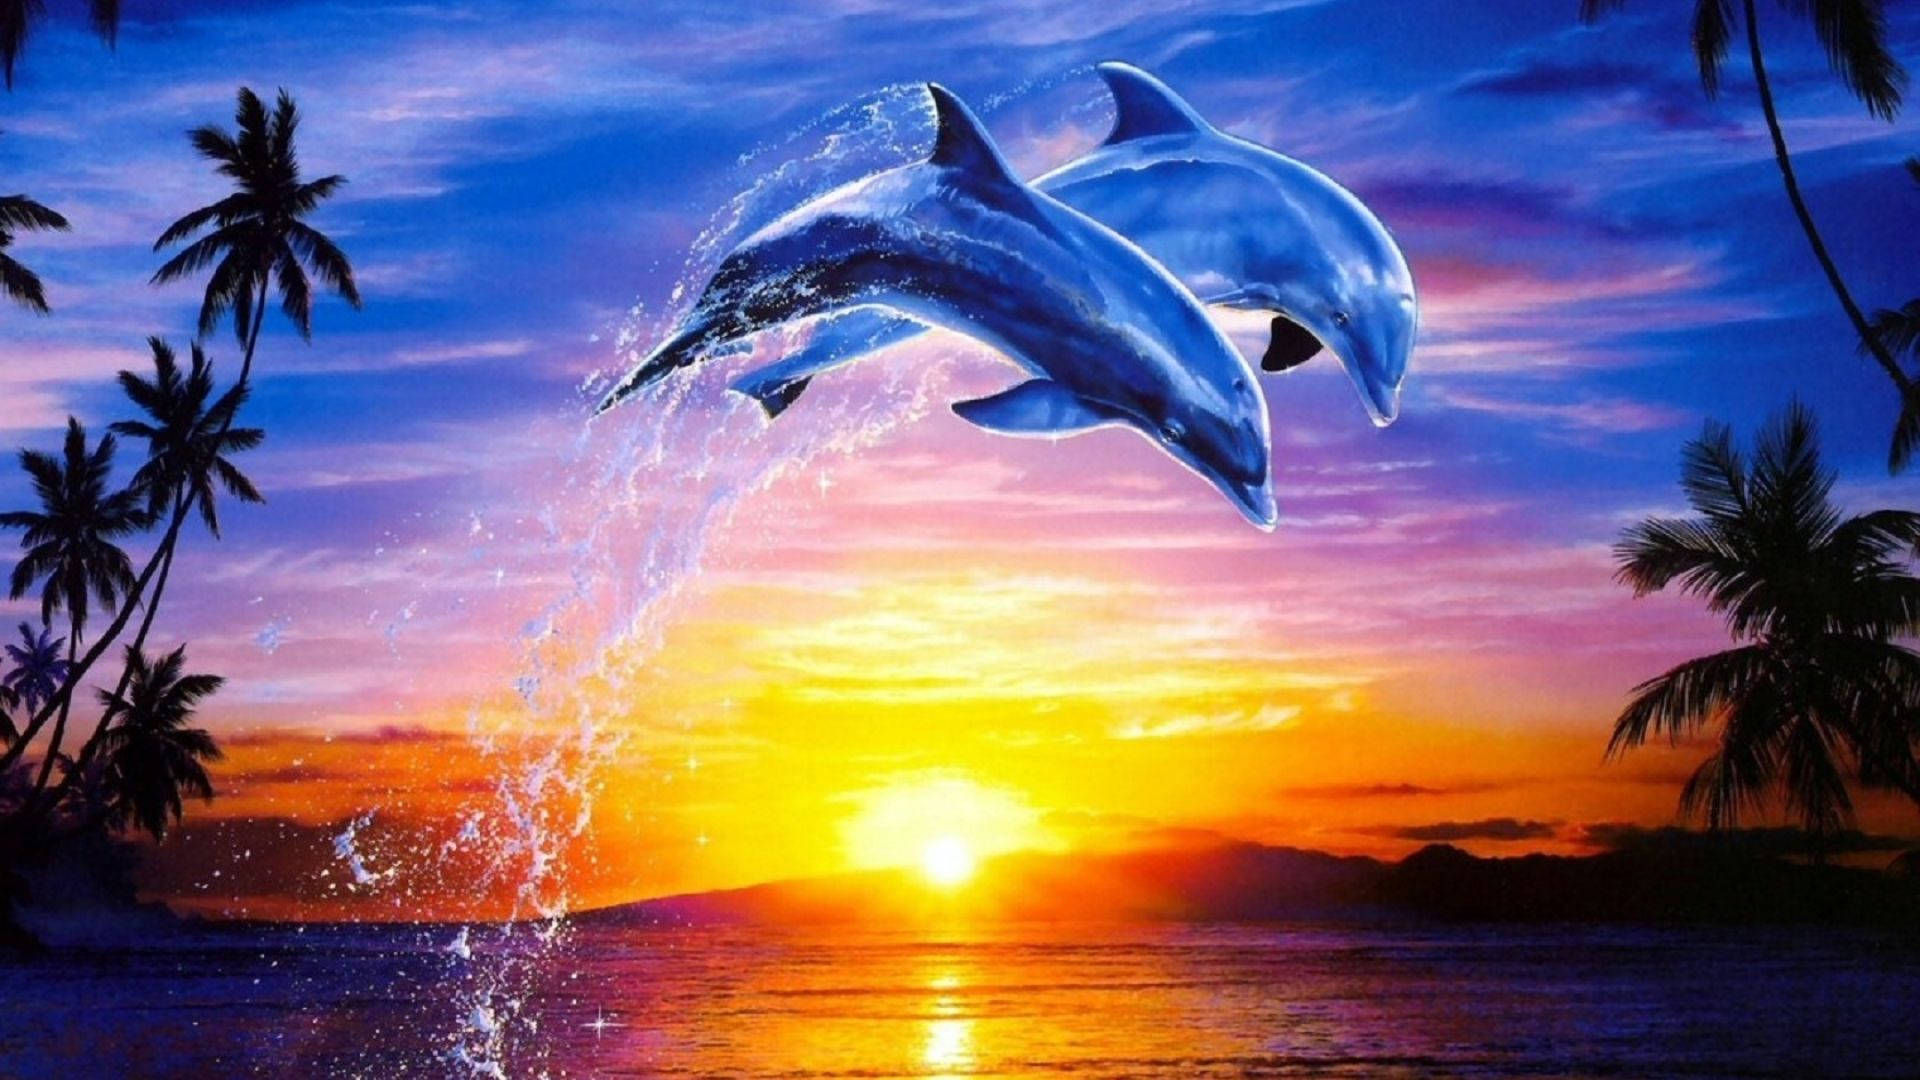 Leaping Dolphins At Sunset Wallpaper